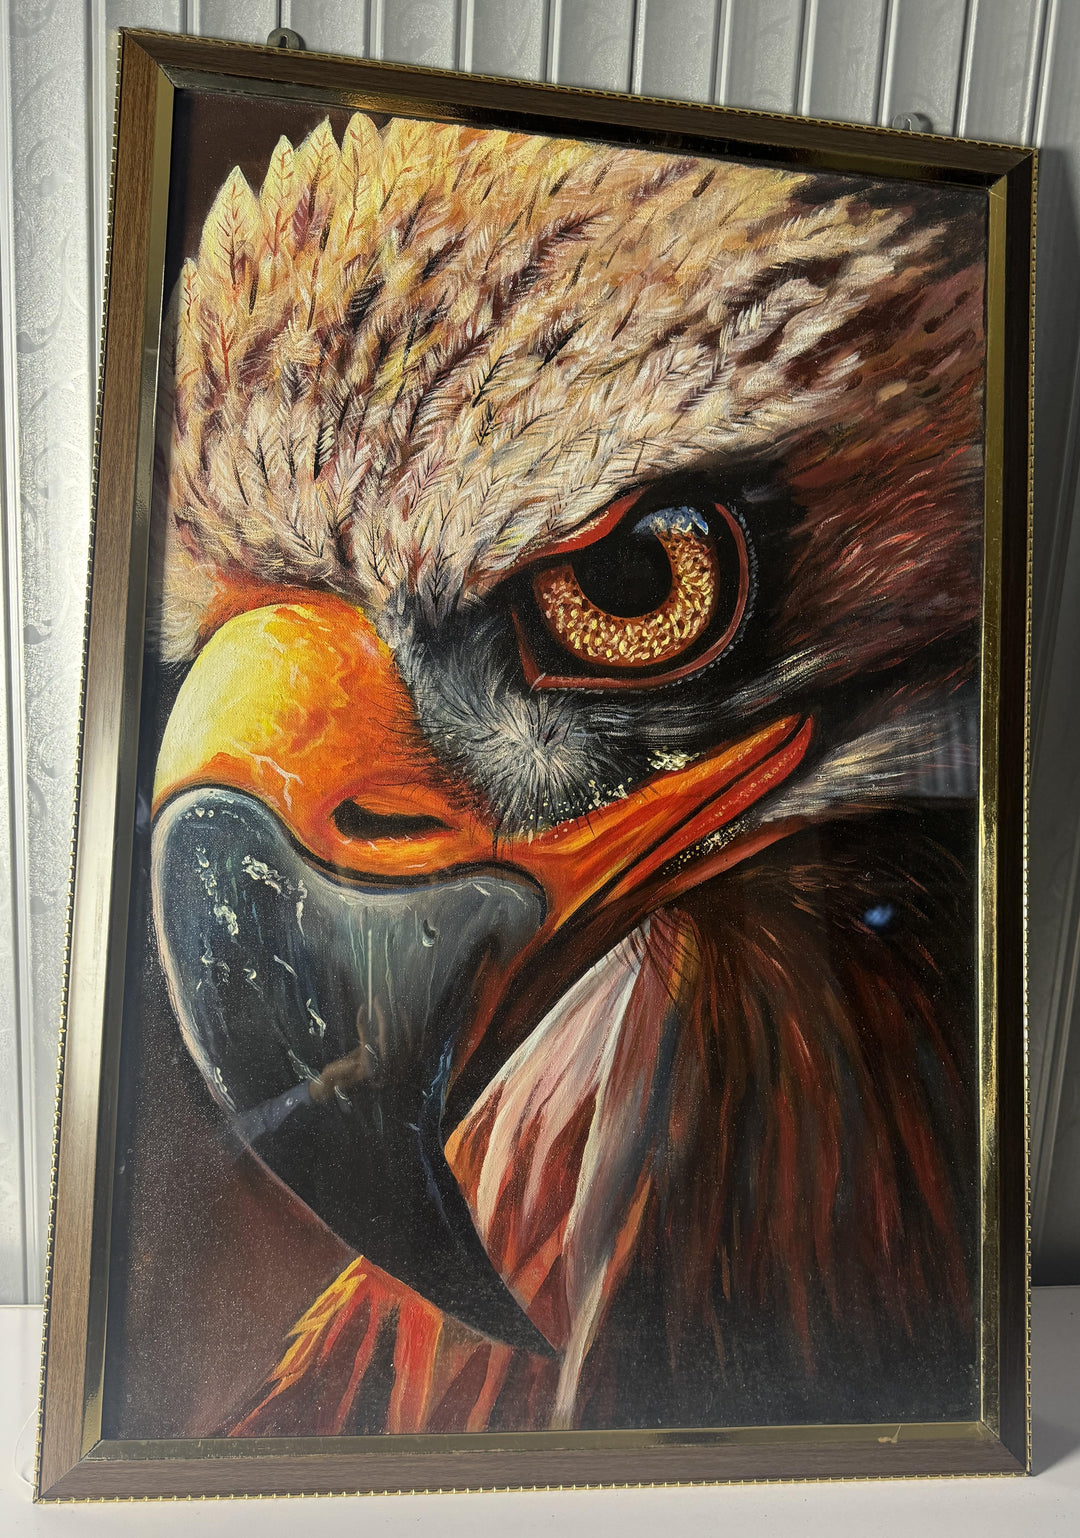 Majestic Eagle Close-Up Oil Painting | Eagle Fine Art oil pastel drawing | Handmade Wall Art | Unique Home Decor | by Muslim Sadiq